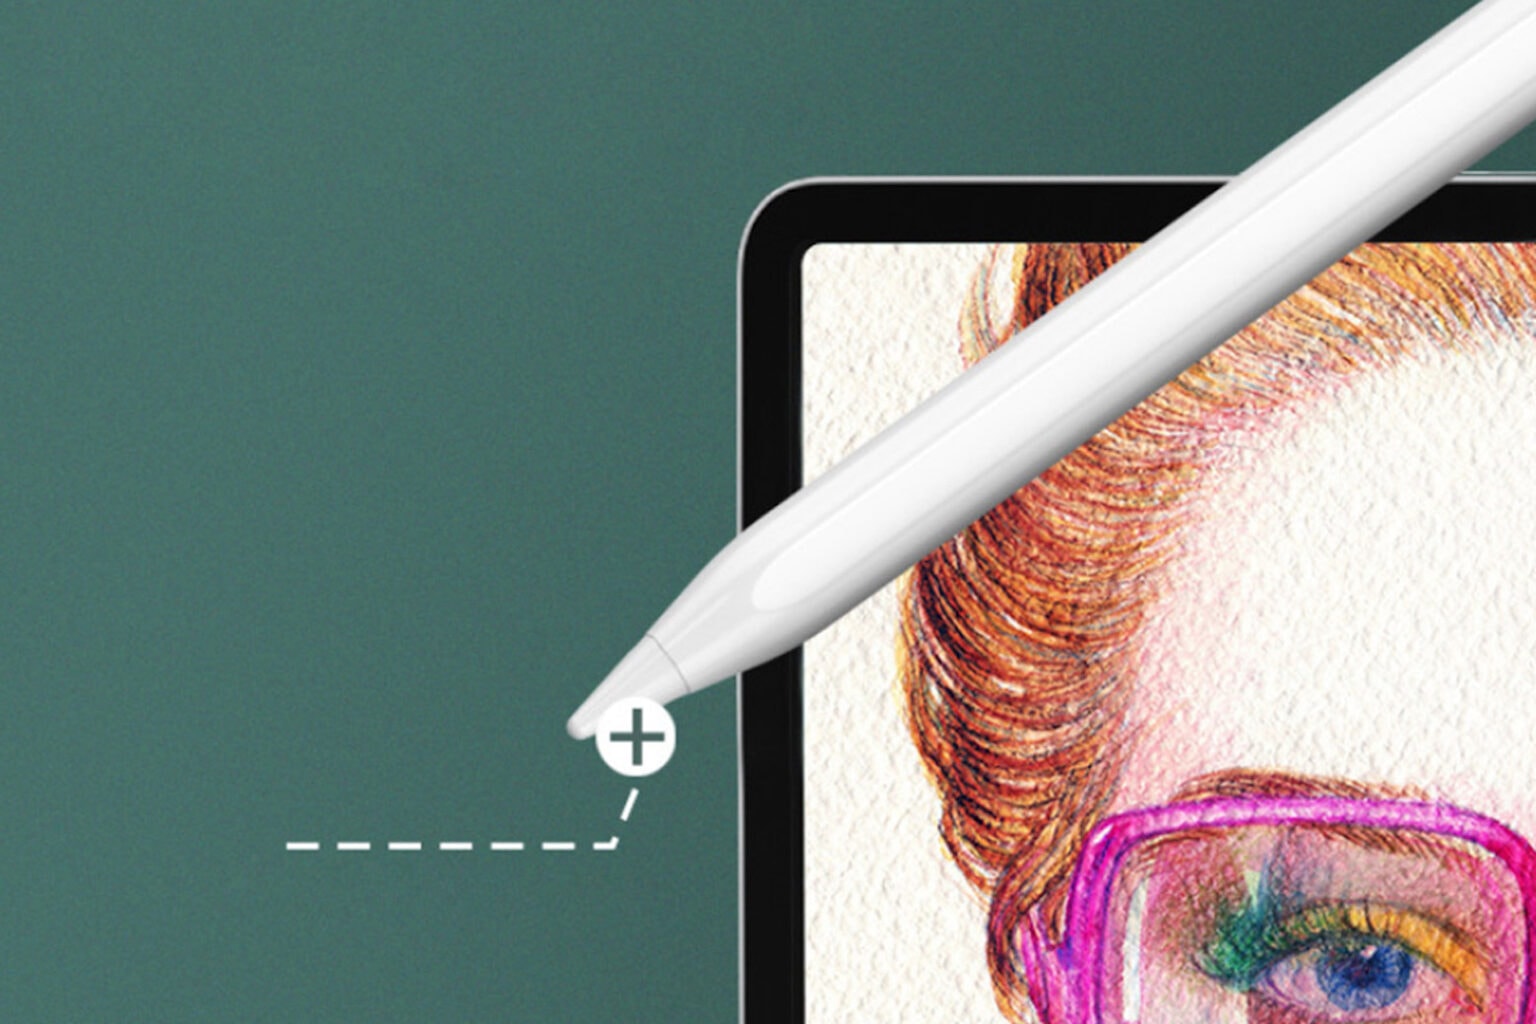 This pixel-precise digital pen for iPad and other tablets is now under $36.